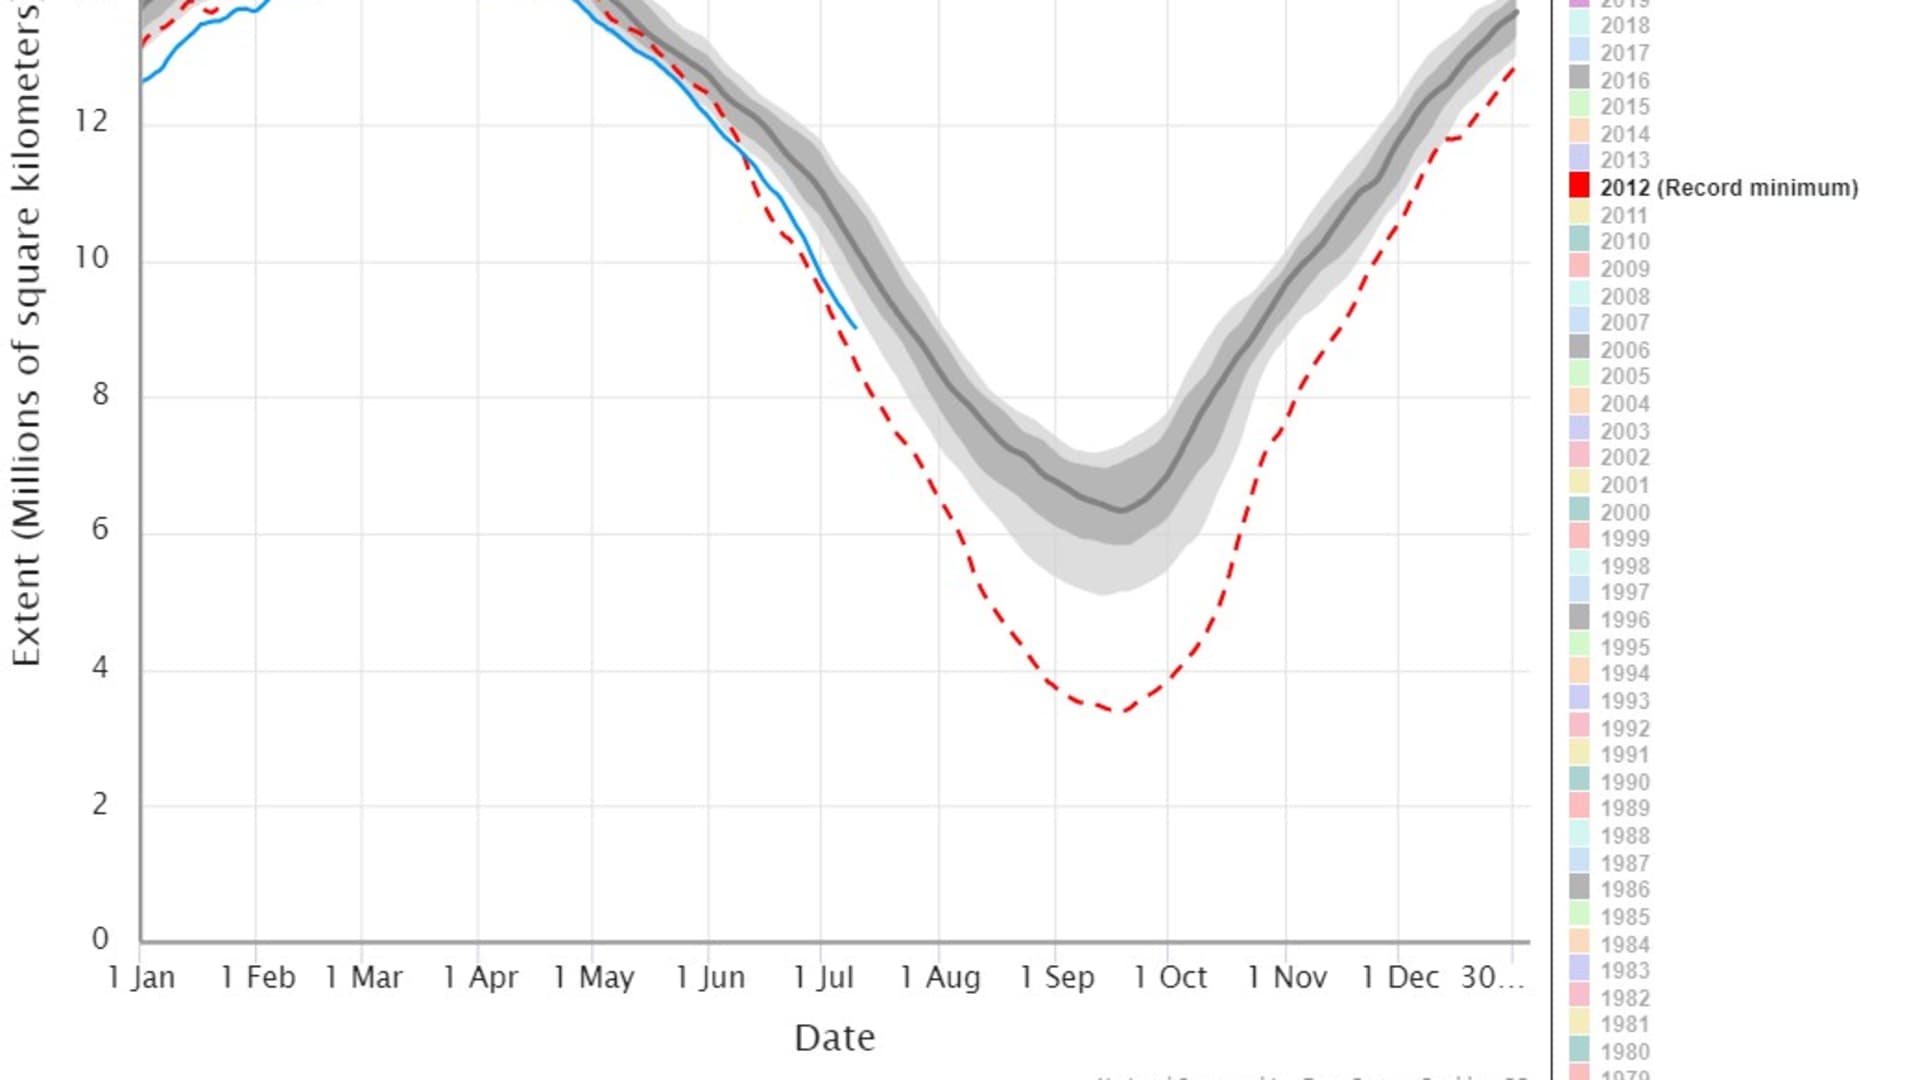 The blue line represents sea ice in the Artic in 2023. The red line shows the sea ice in 2012, which is the recorded minimum. 